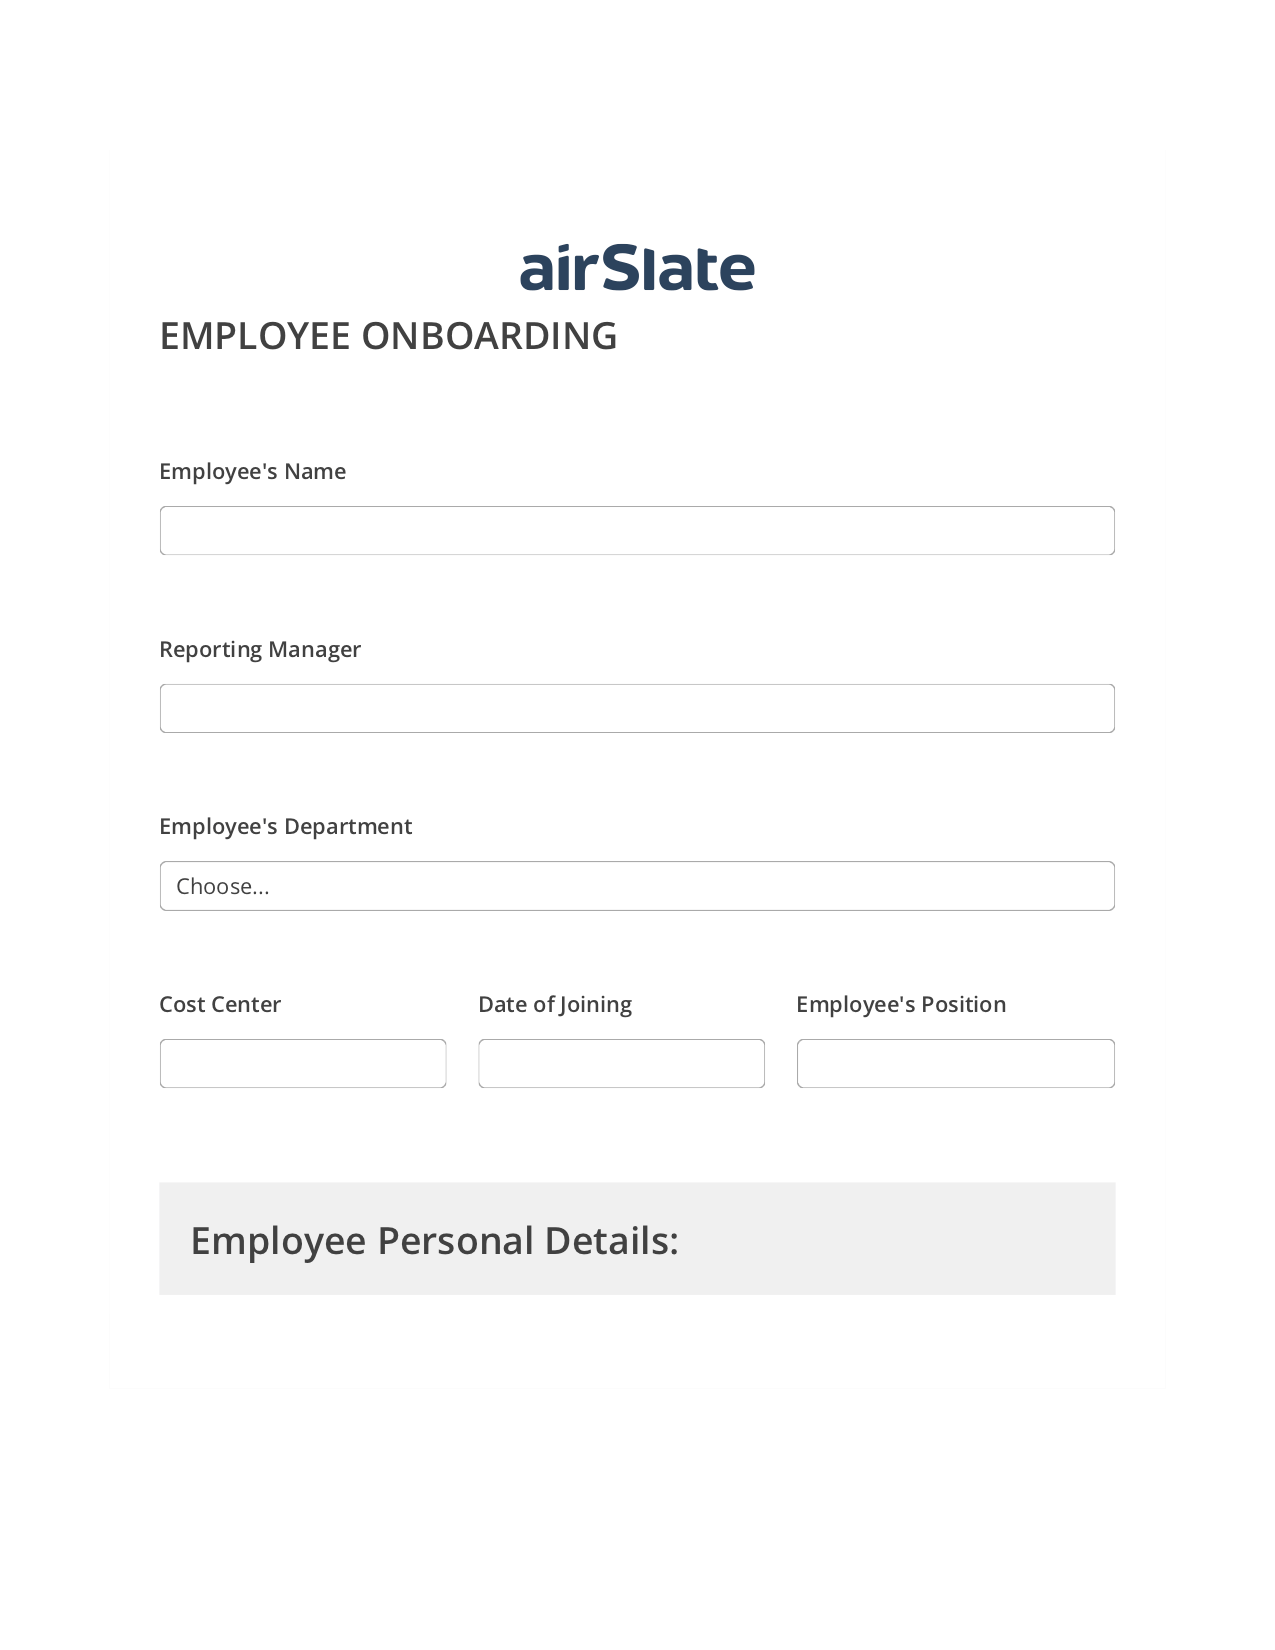 Employee Onboarding Workflow Prefill from NetSuite records, Hide Signatures Bot, Export to NetSuite Bot